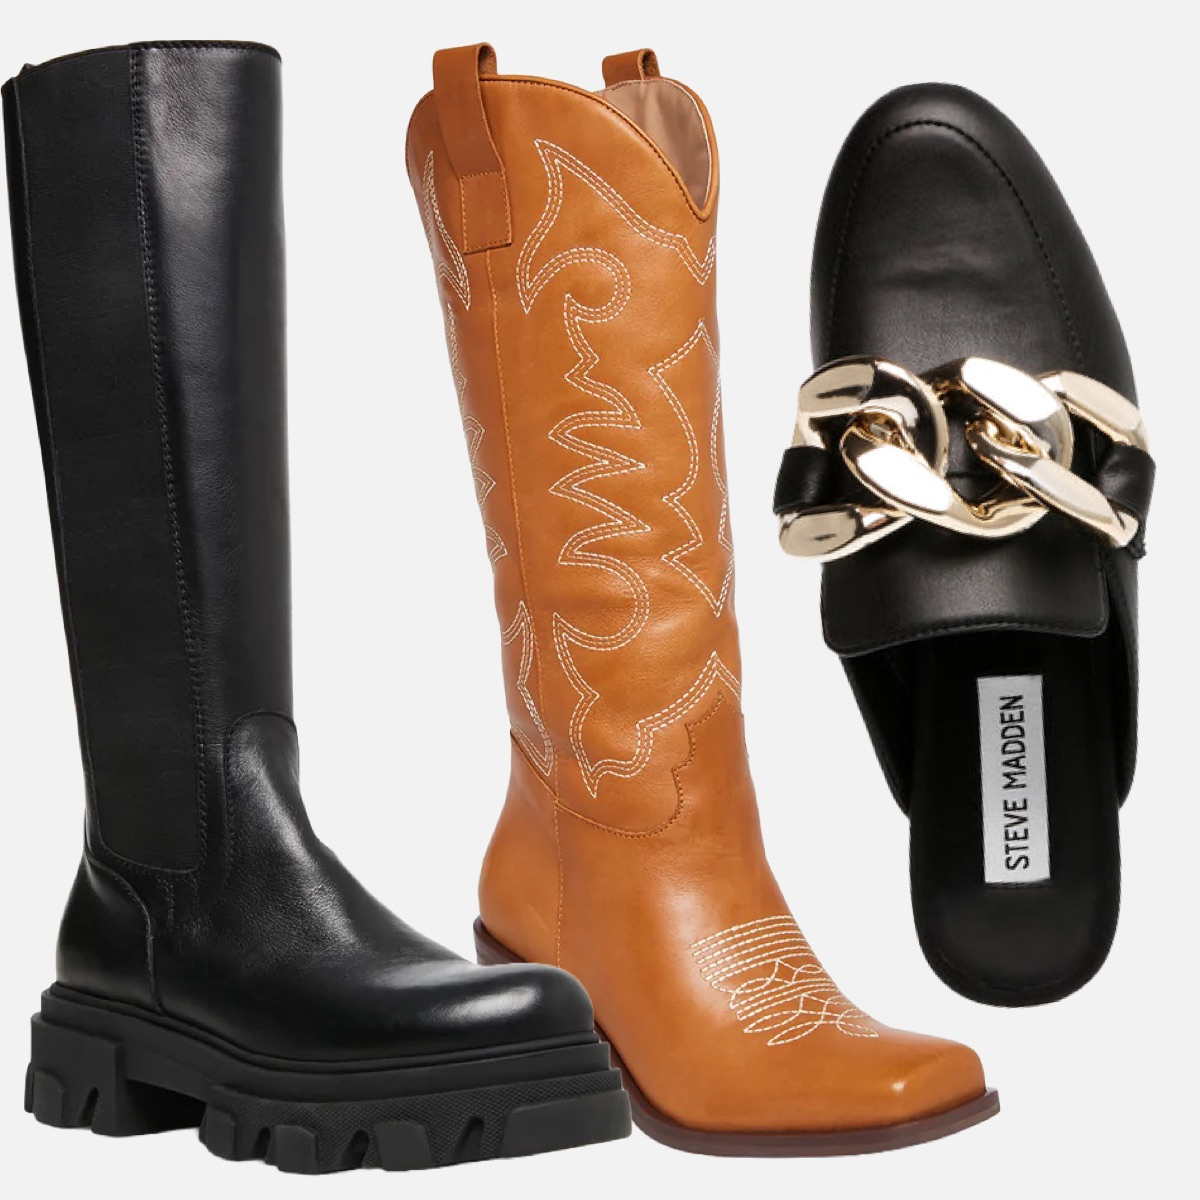 Steve Madden Extra Off Sale: Score Boots for $36 & More Deals - E! Online